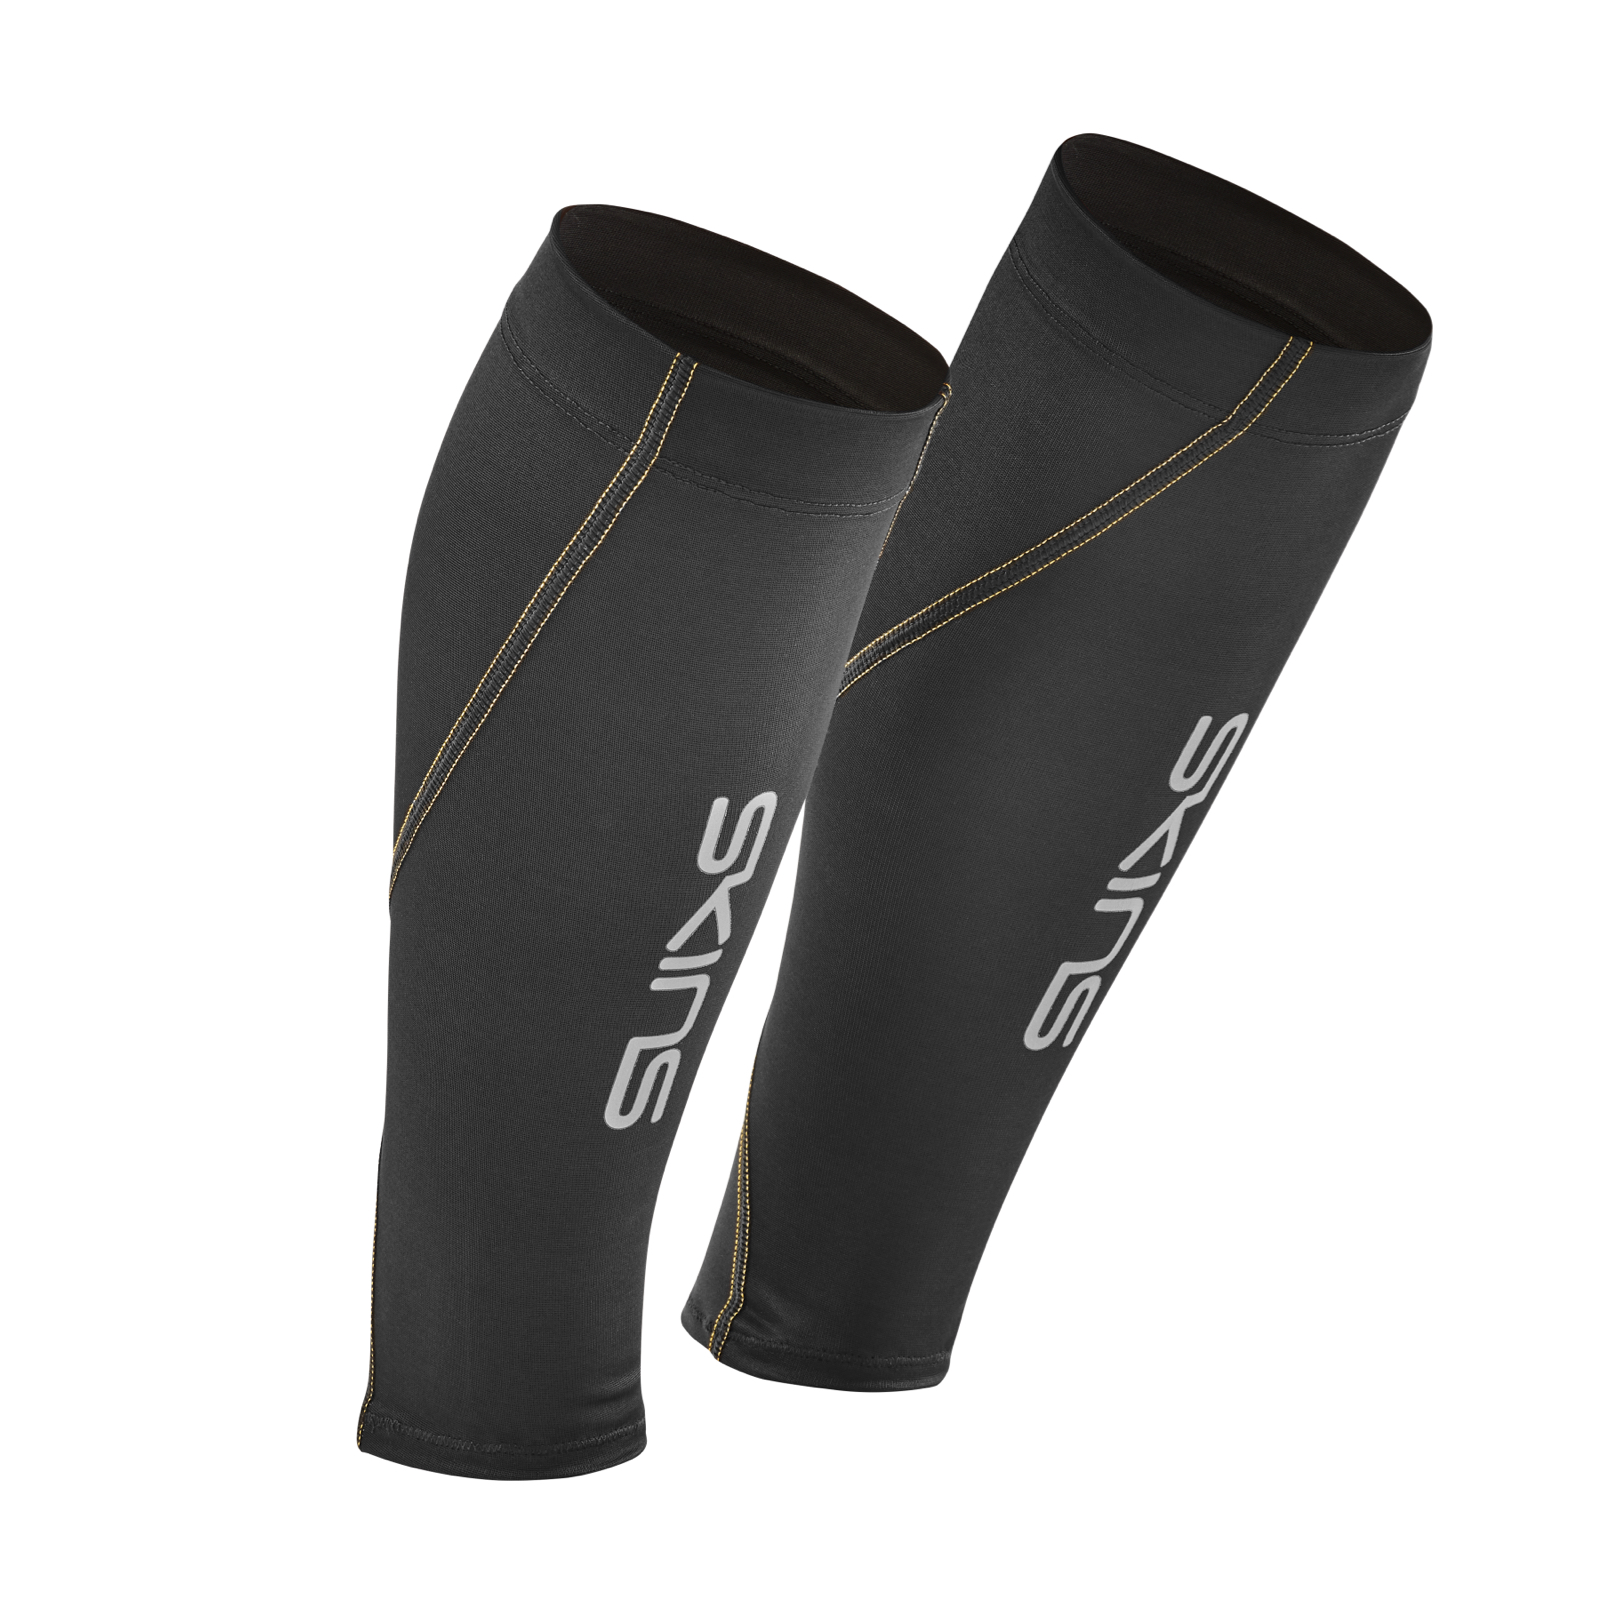 Skins Unisex Compression Recovery Calf Sleeves, Medium